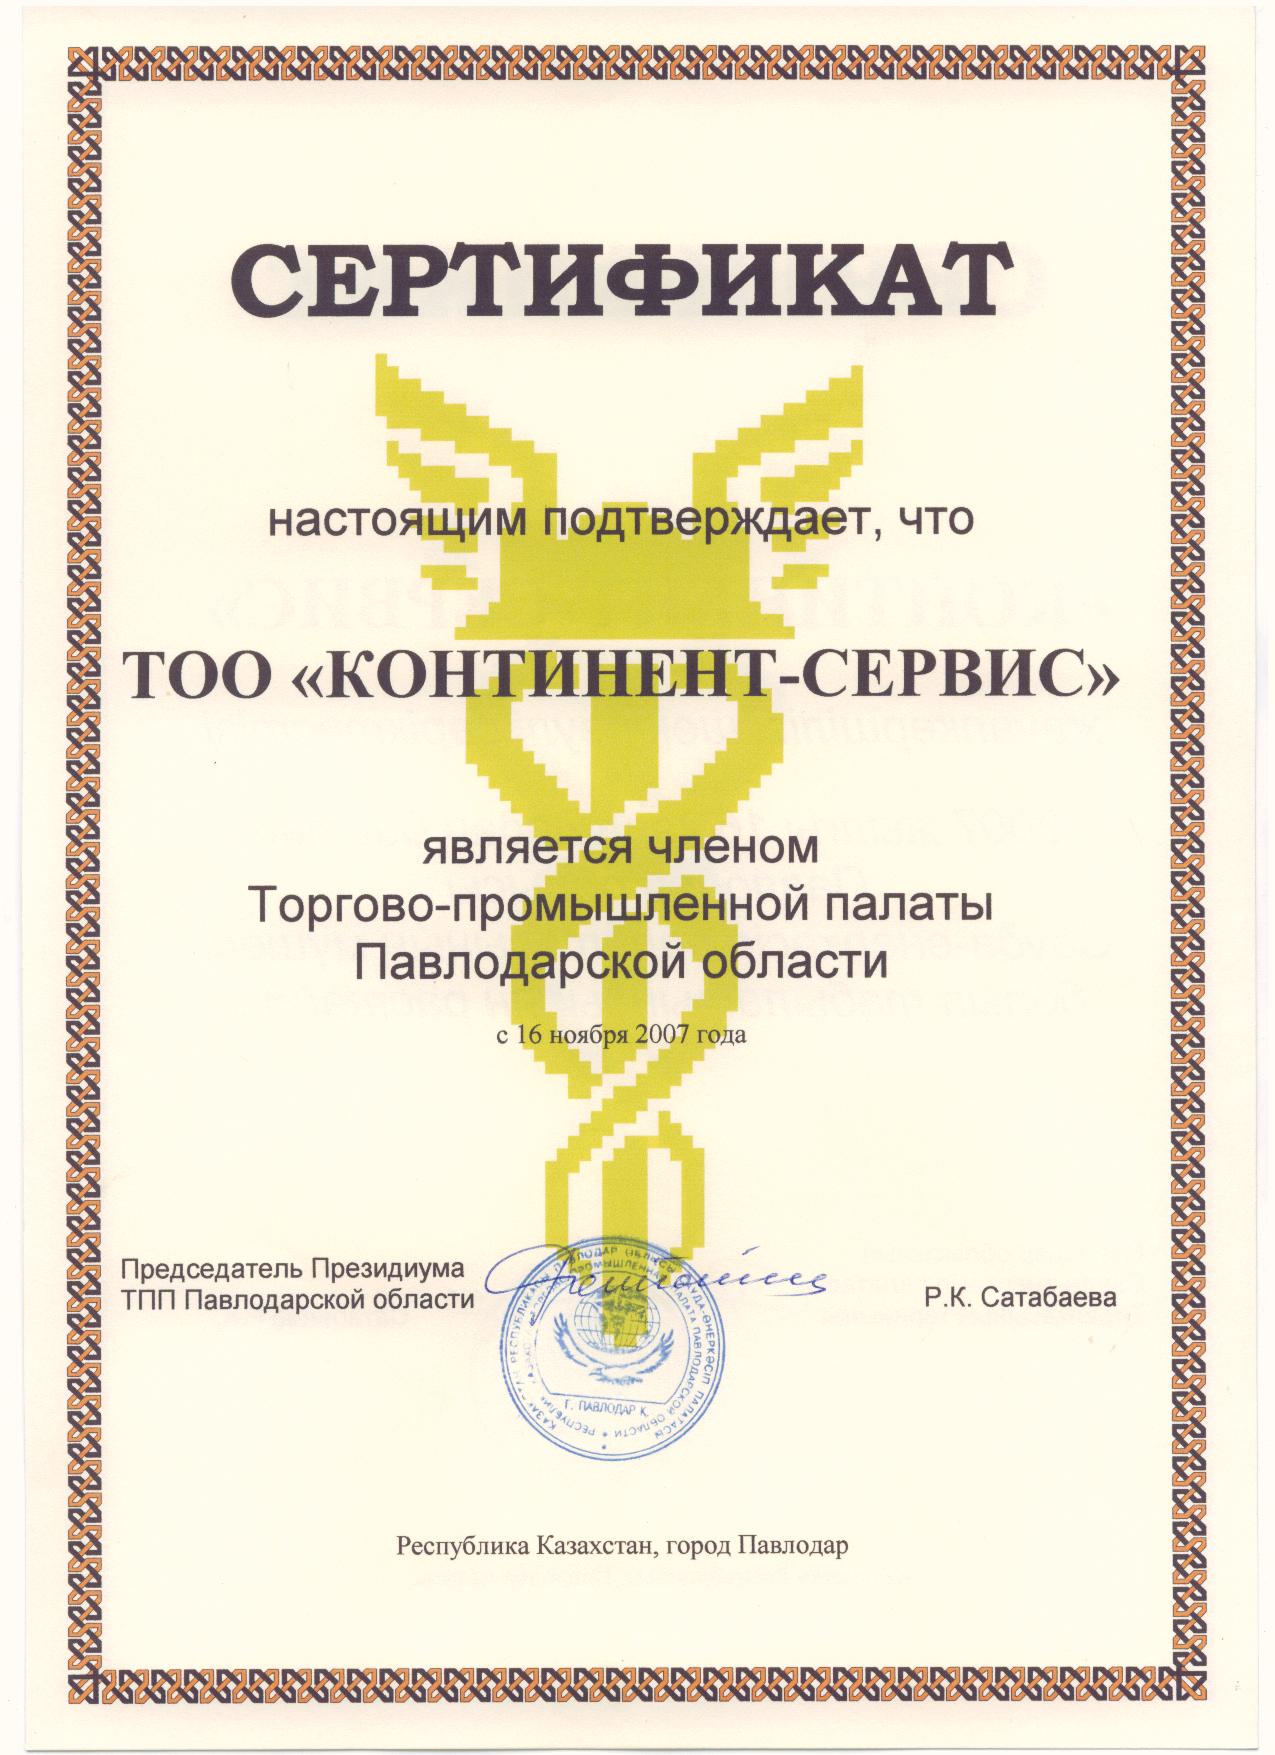 Certificate of Chamber of Commerce